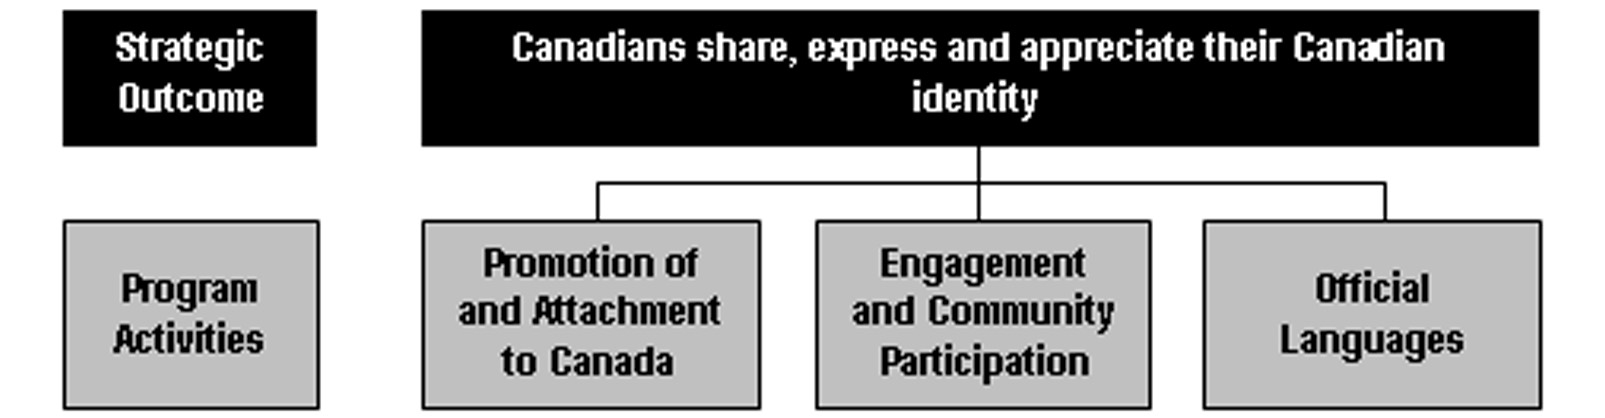 Strategic Outcome #2 - Canadians share, express and appreciate their Canadian